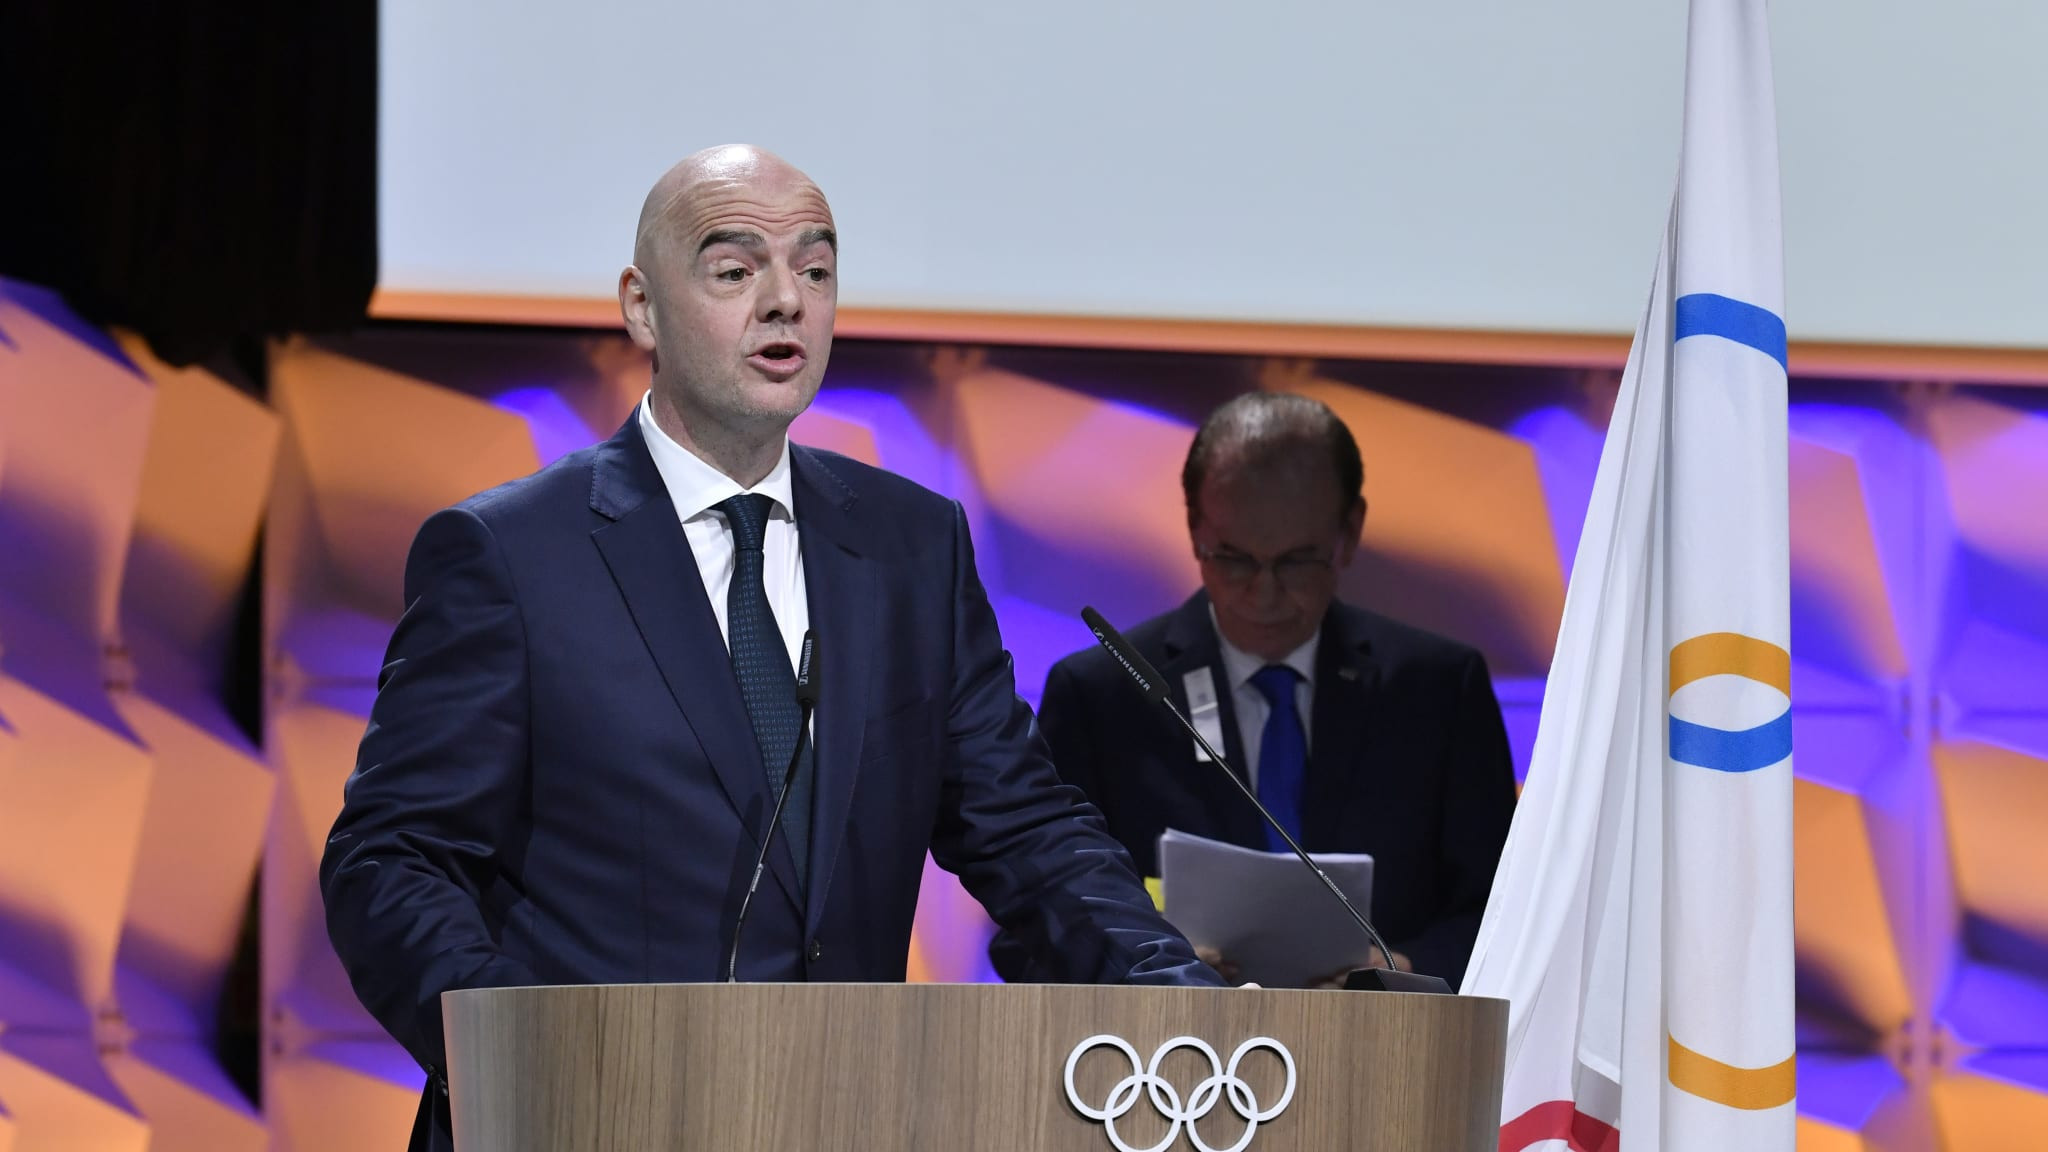 Gianni Infantino was elected as a member of the International Olympic Committee in January ©FIFA